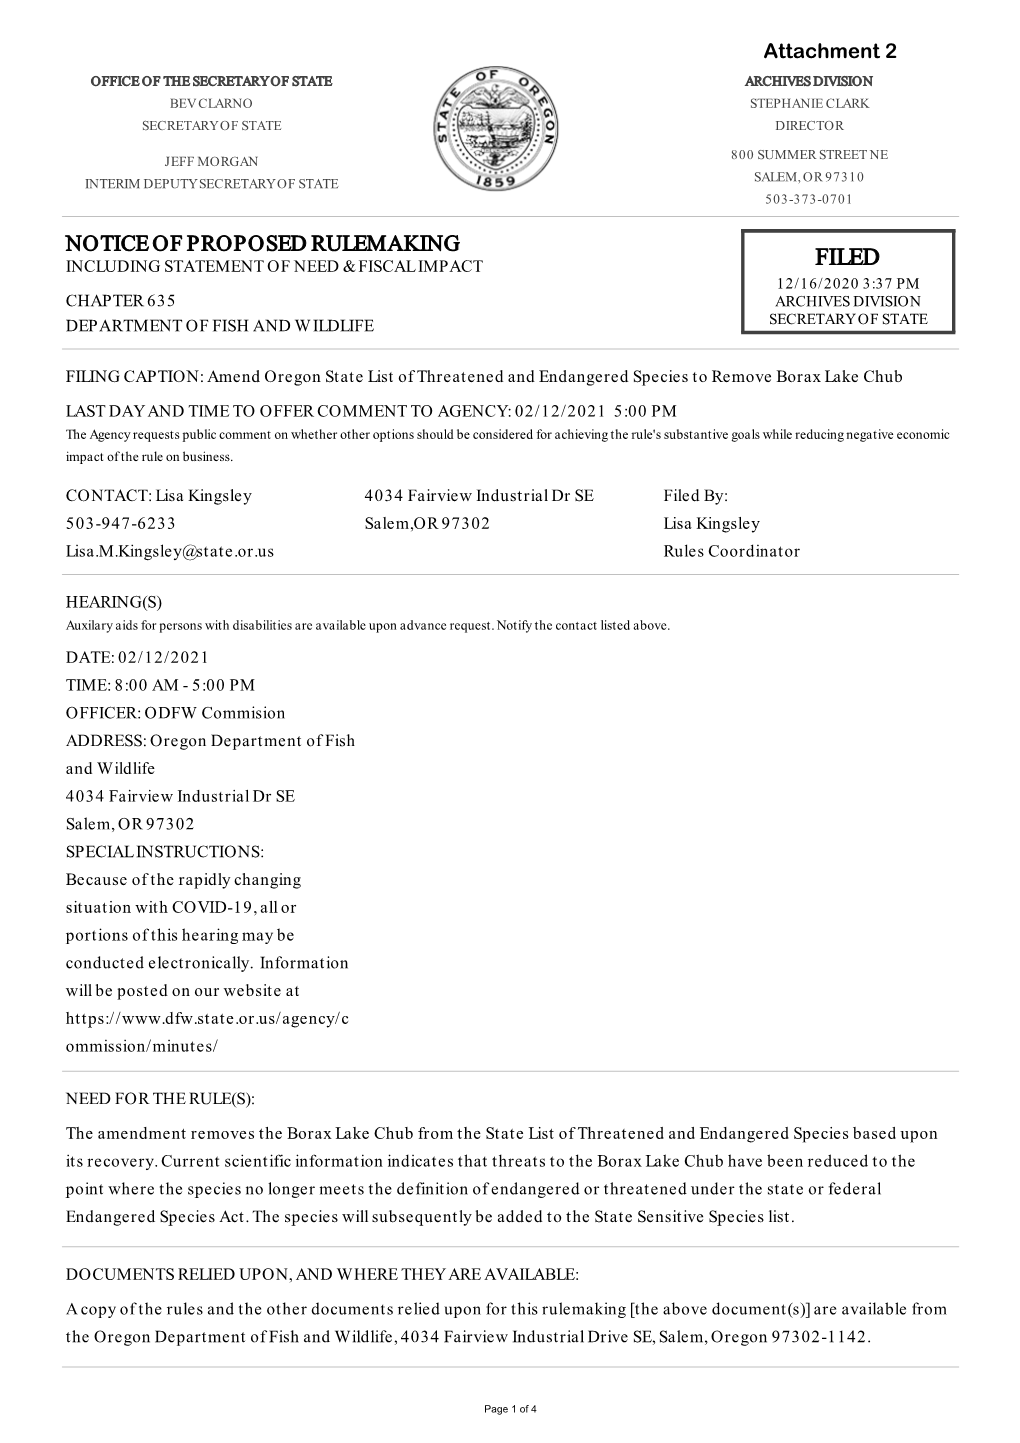 Attachment 2 Notice of Proposed Rulemaking Hearing And